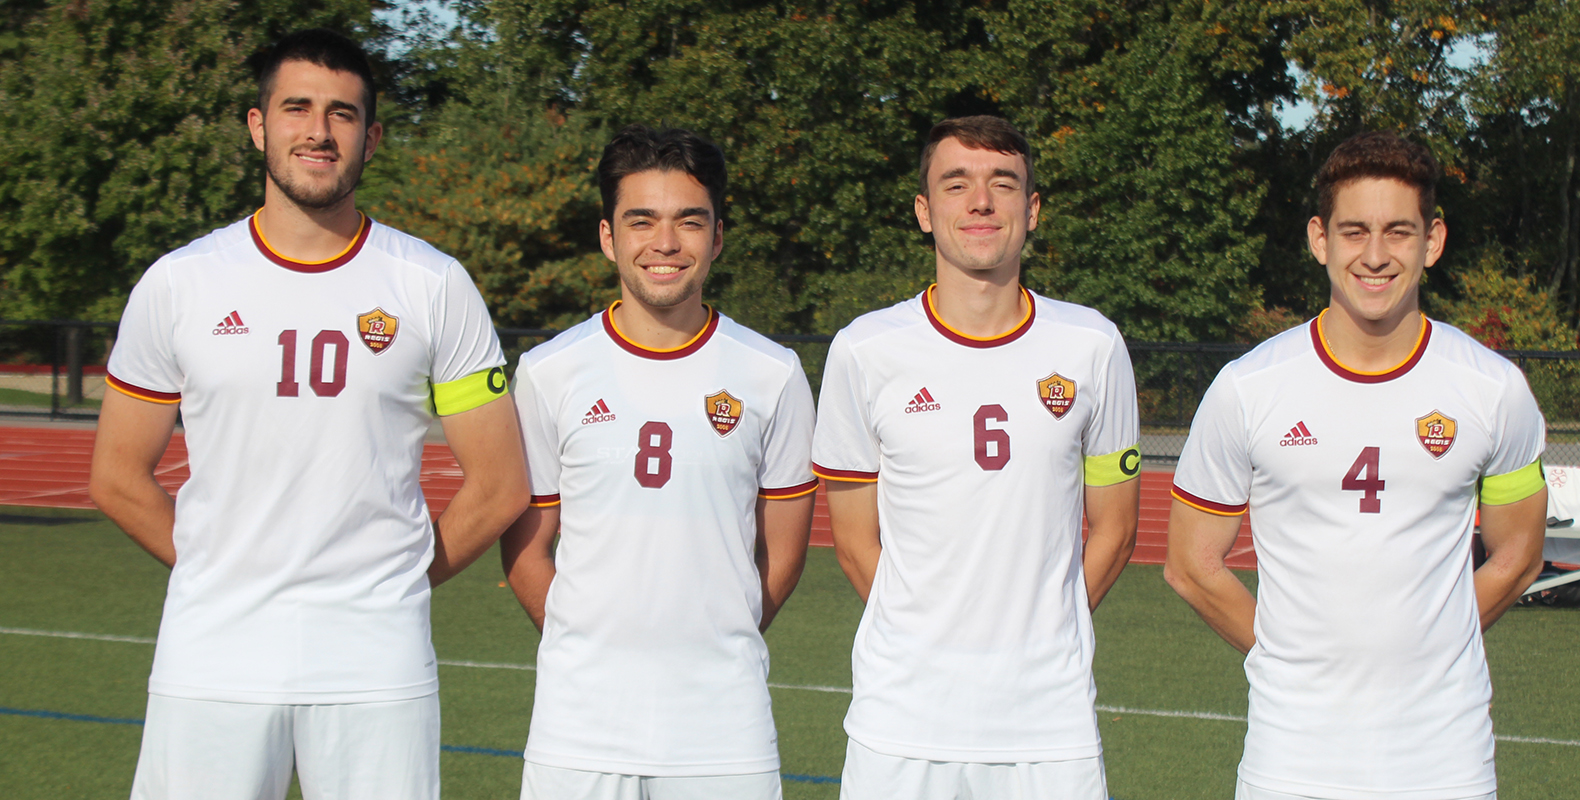 Competitive Battle Results in Loss for Men’s Soccer on Senior Day